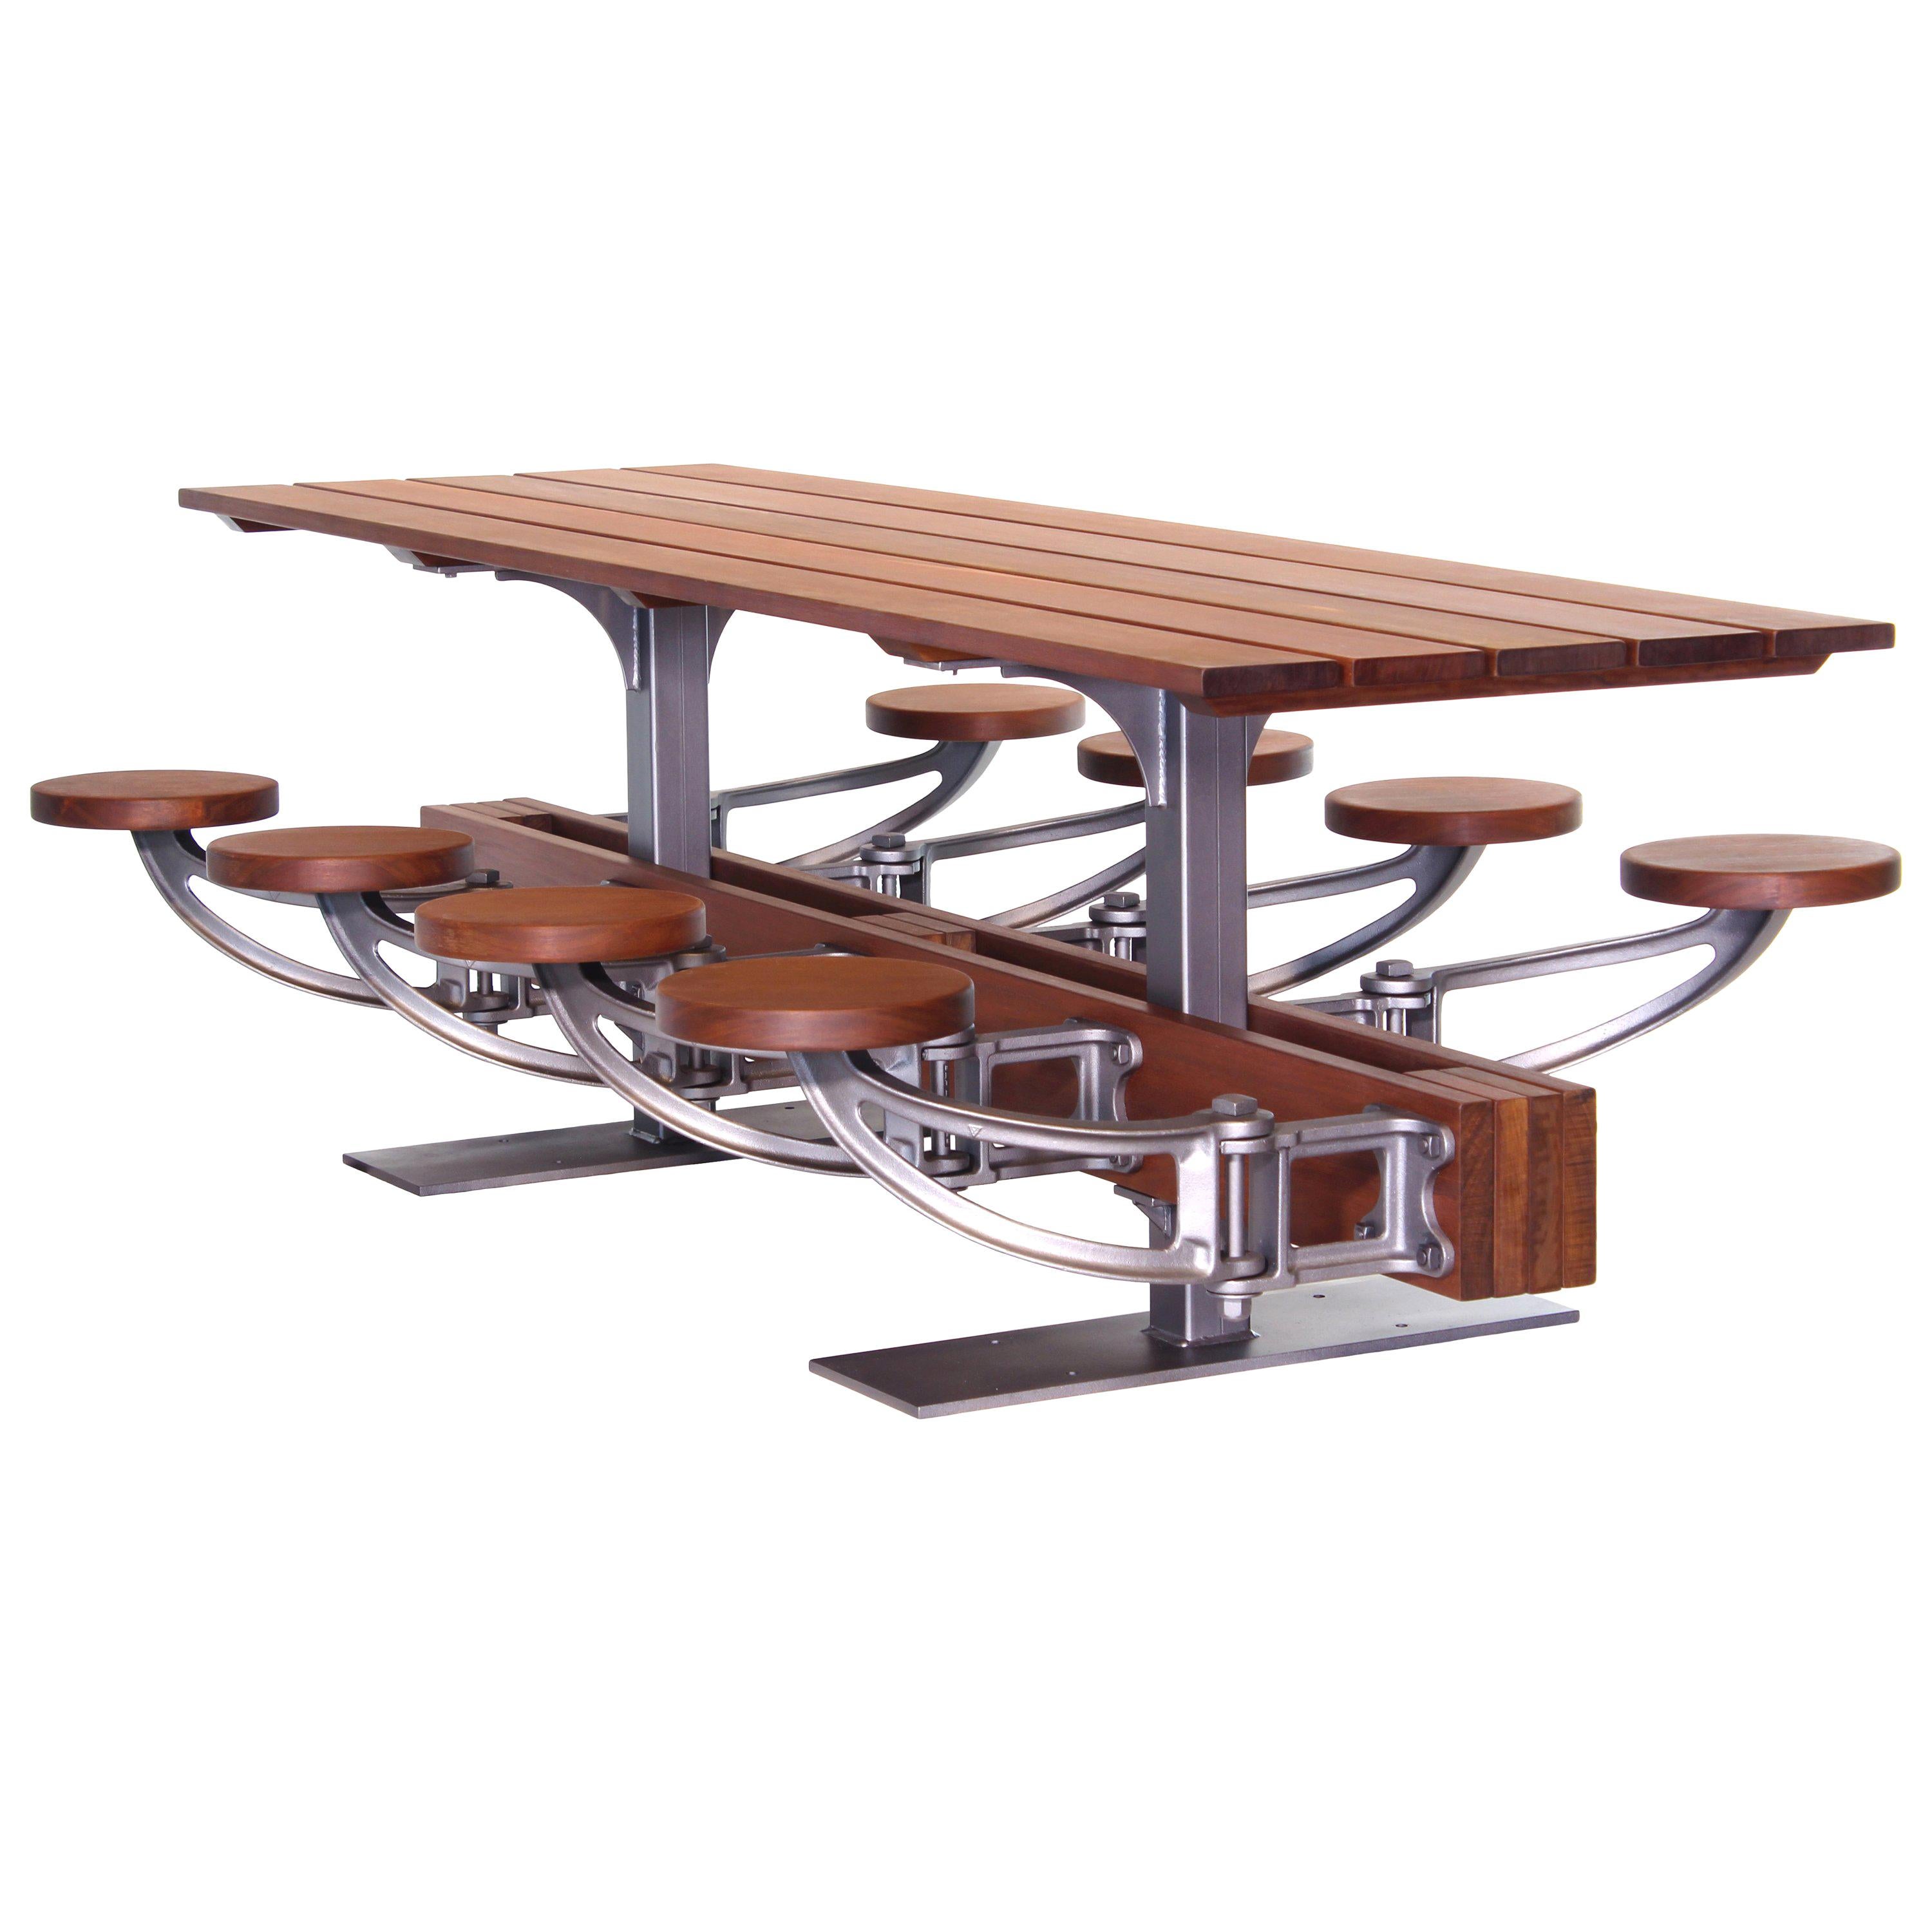 picnic table with swing seats